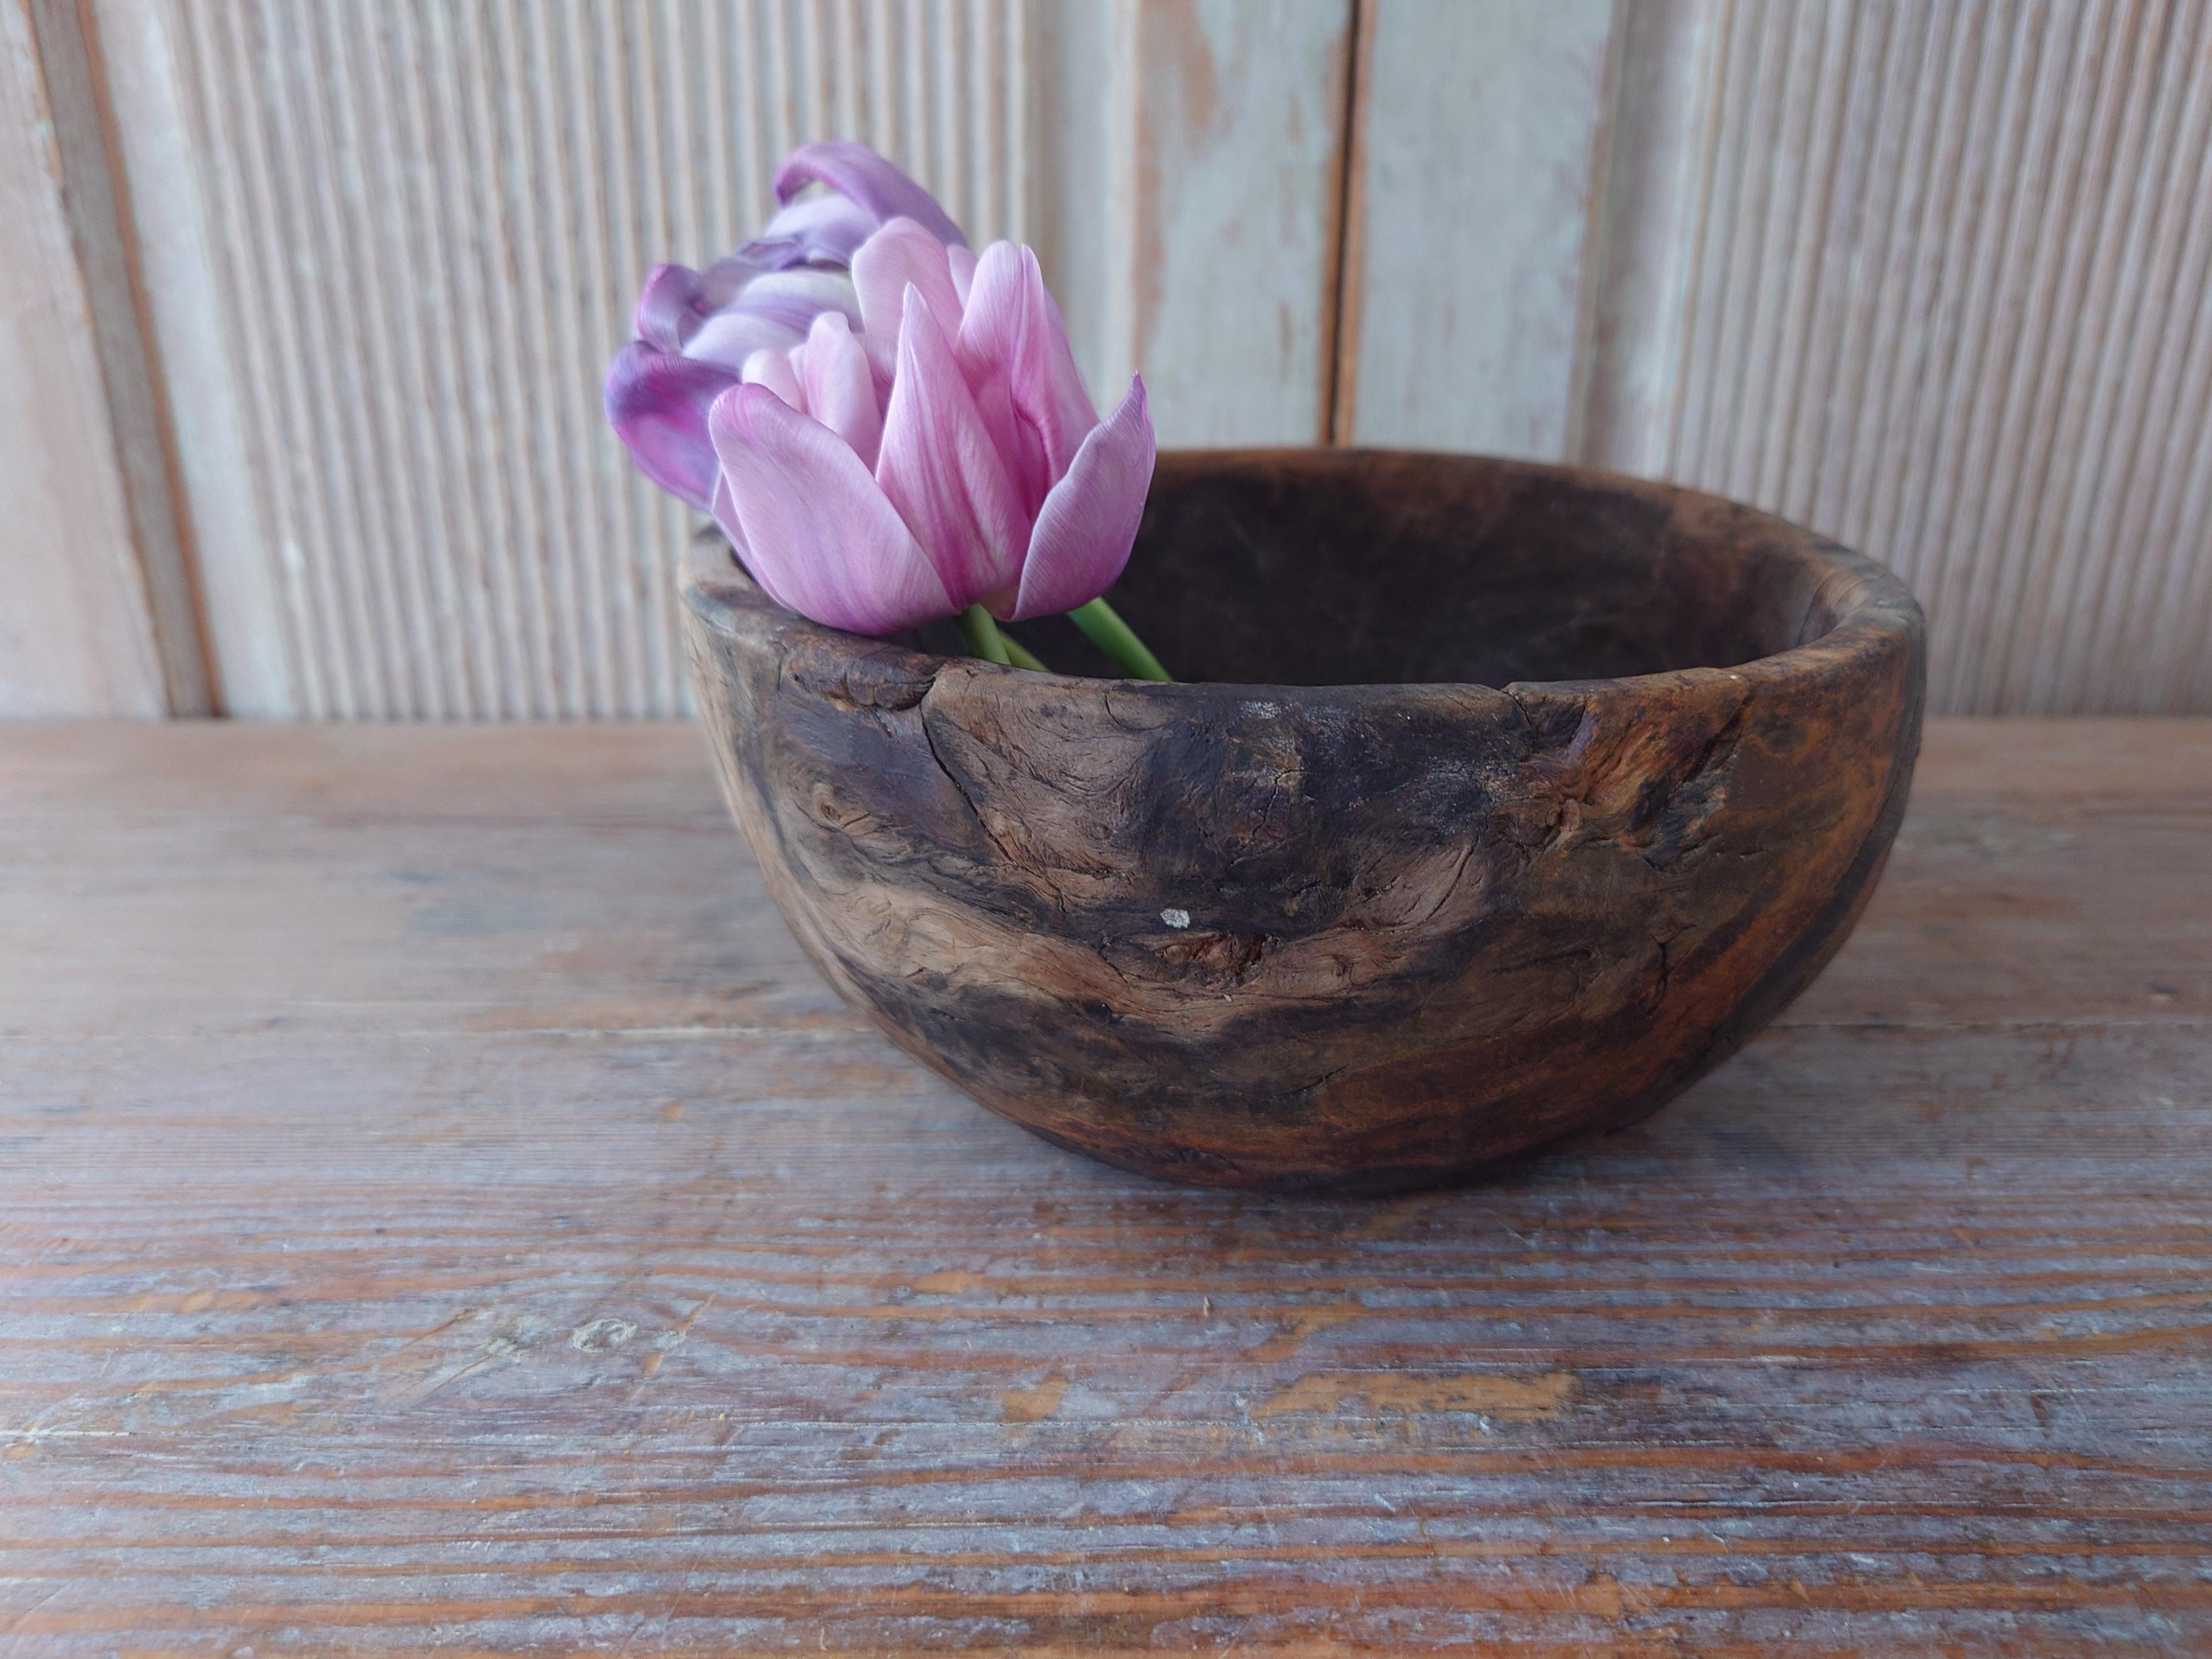 19th century antique rustic rare Swedish Wooden bowl from Dalarna Northern Sweden.
Dated 1864
The surfaces are naturally patinated due tue age,
You can see the use of time.
A truley remarkable piece ,that would make a great statement in any